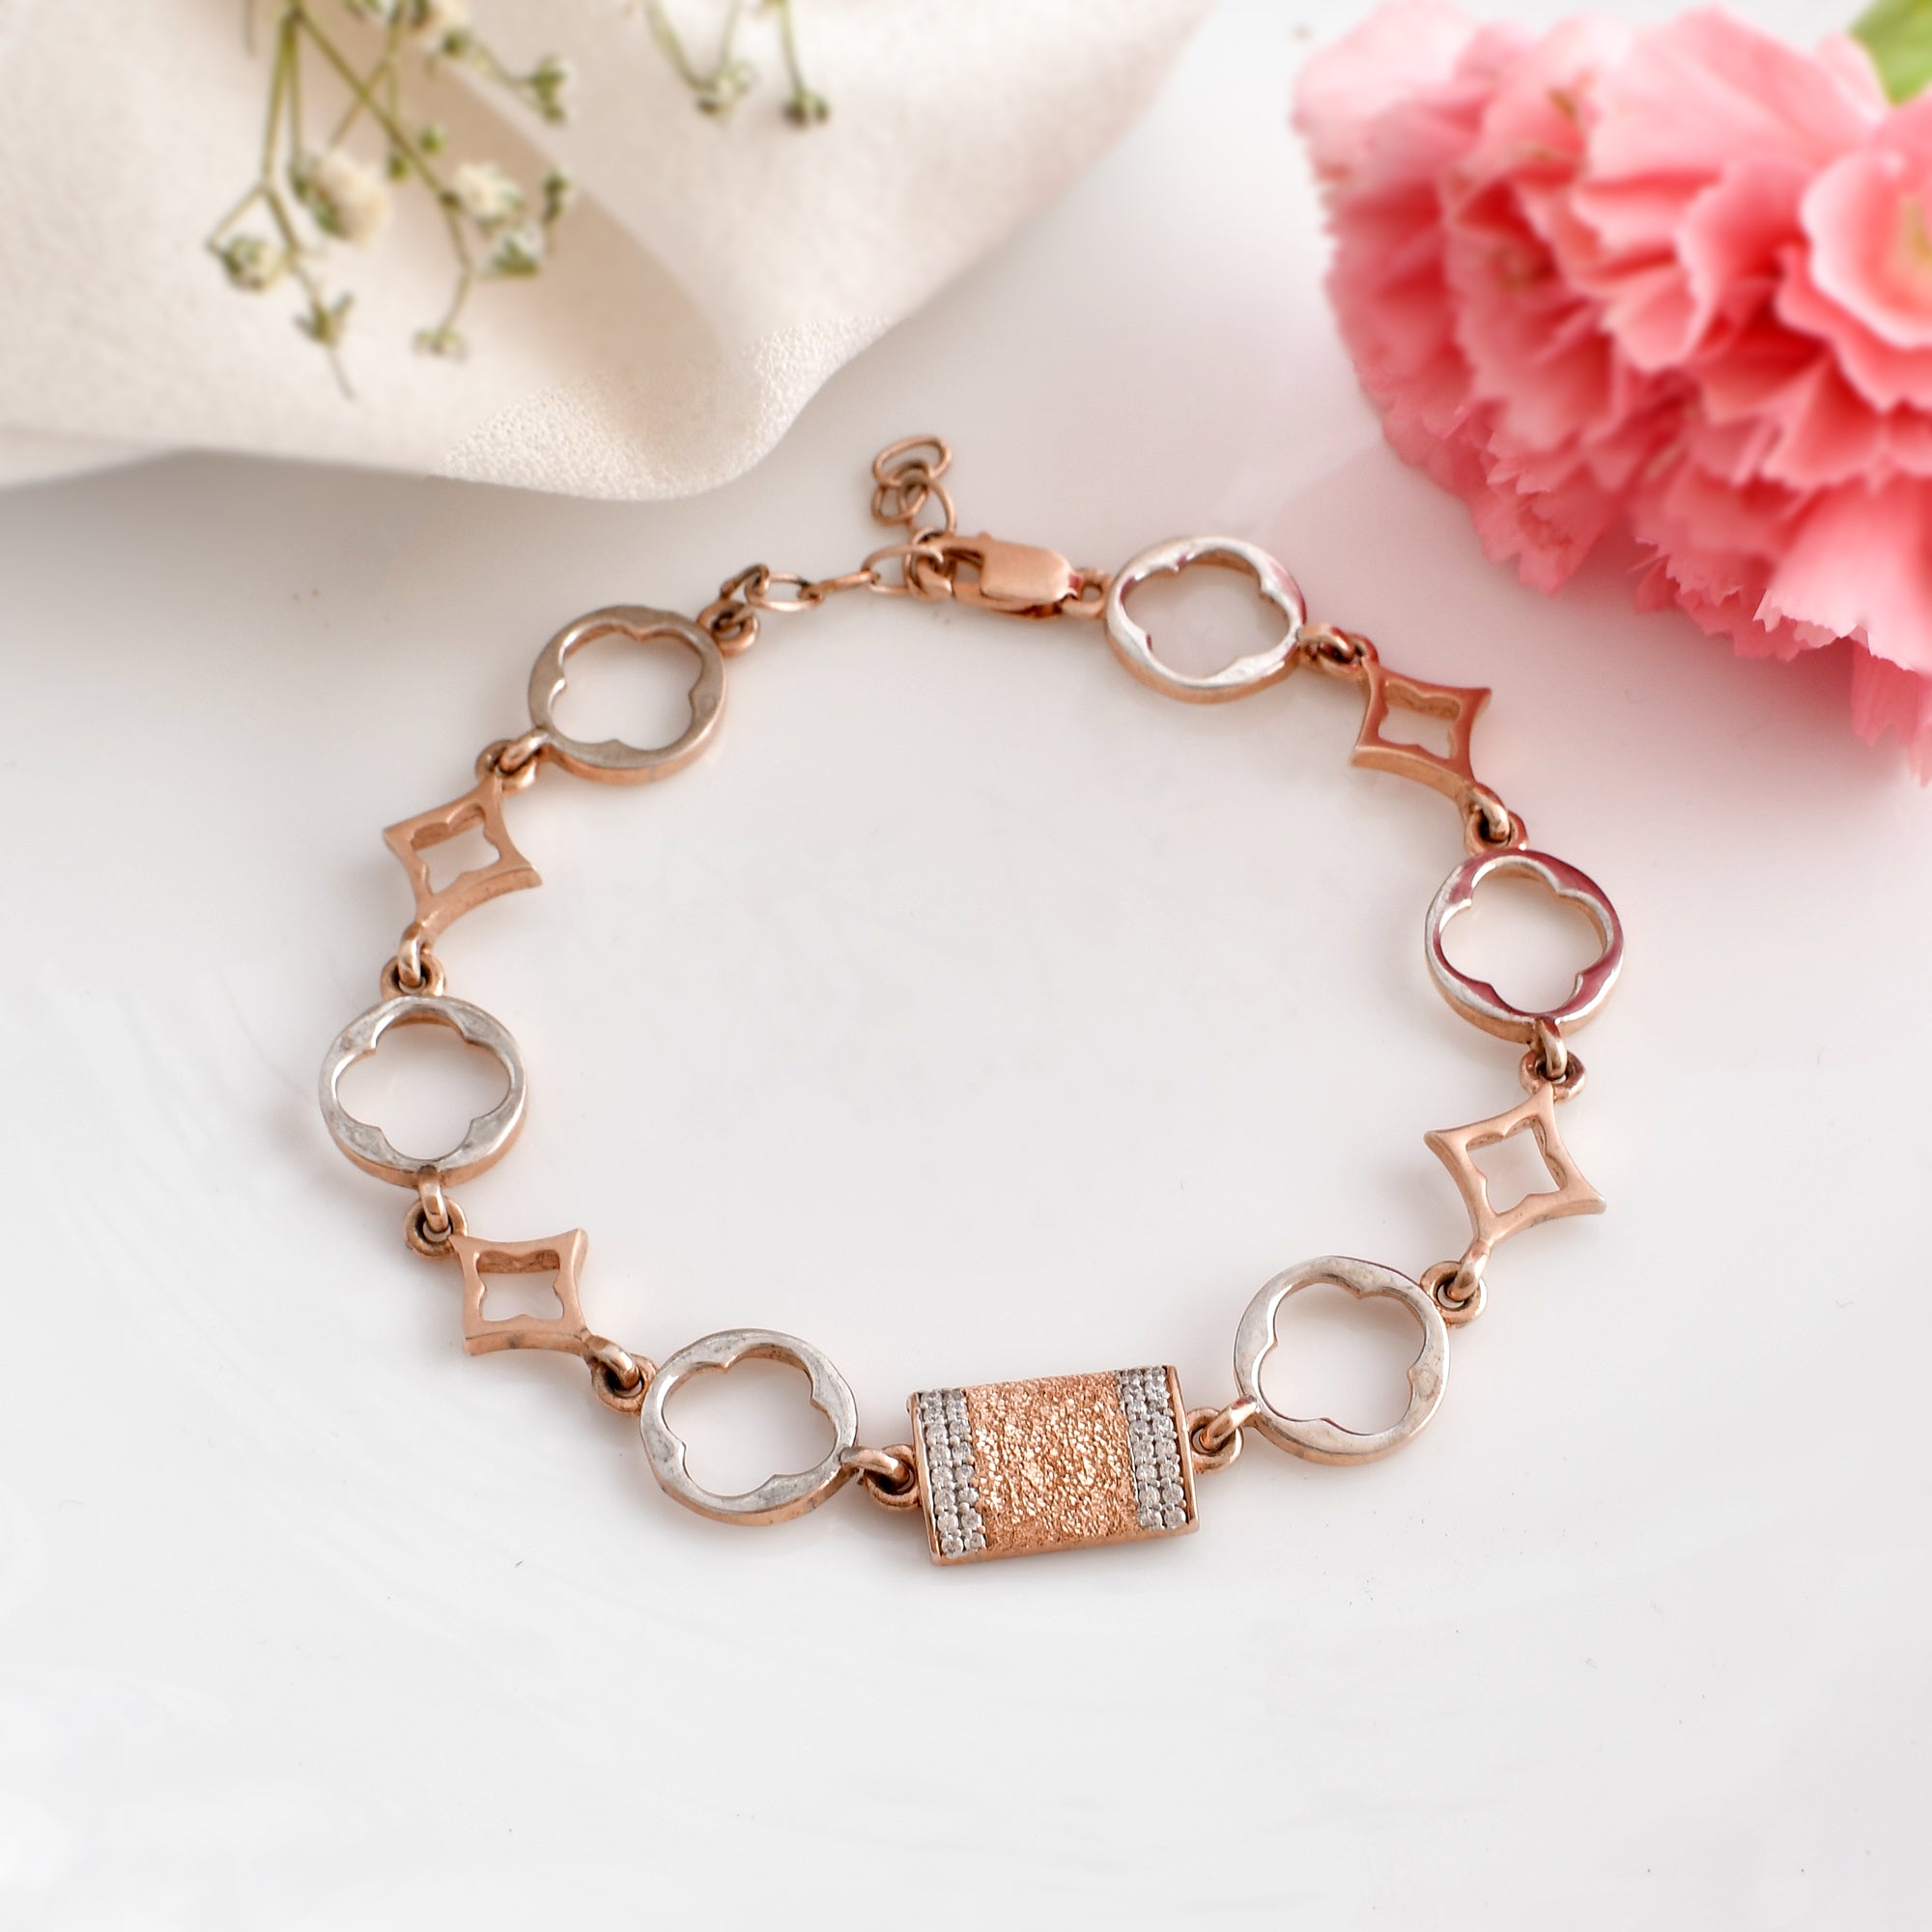 Bvlgari Mother Of Pearl Bracelet in Rose Gold – Wabby's Jewels & Gems